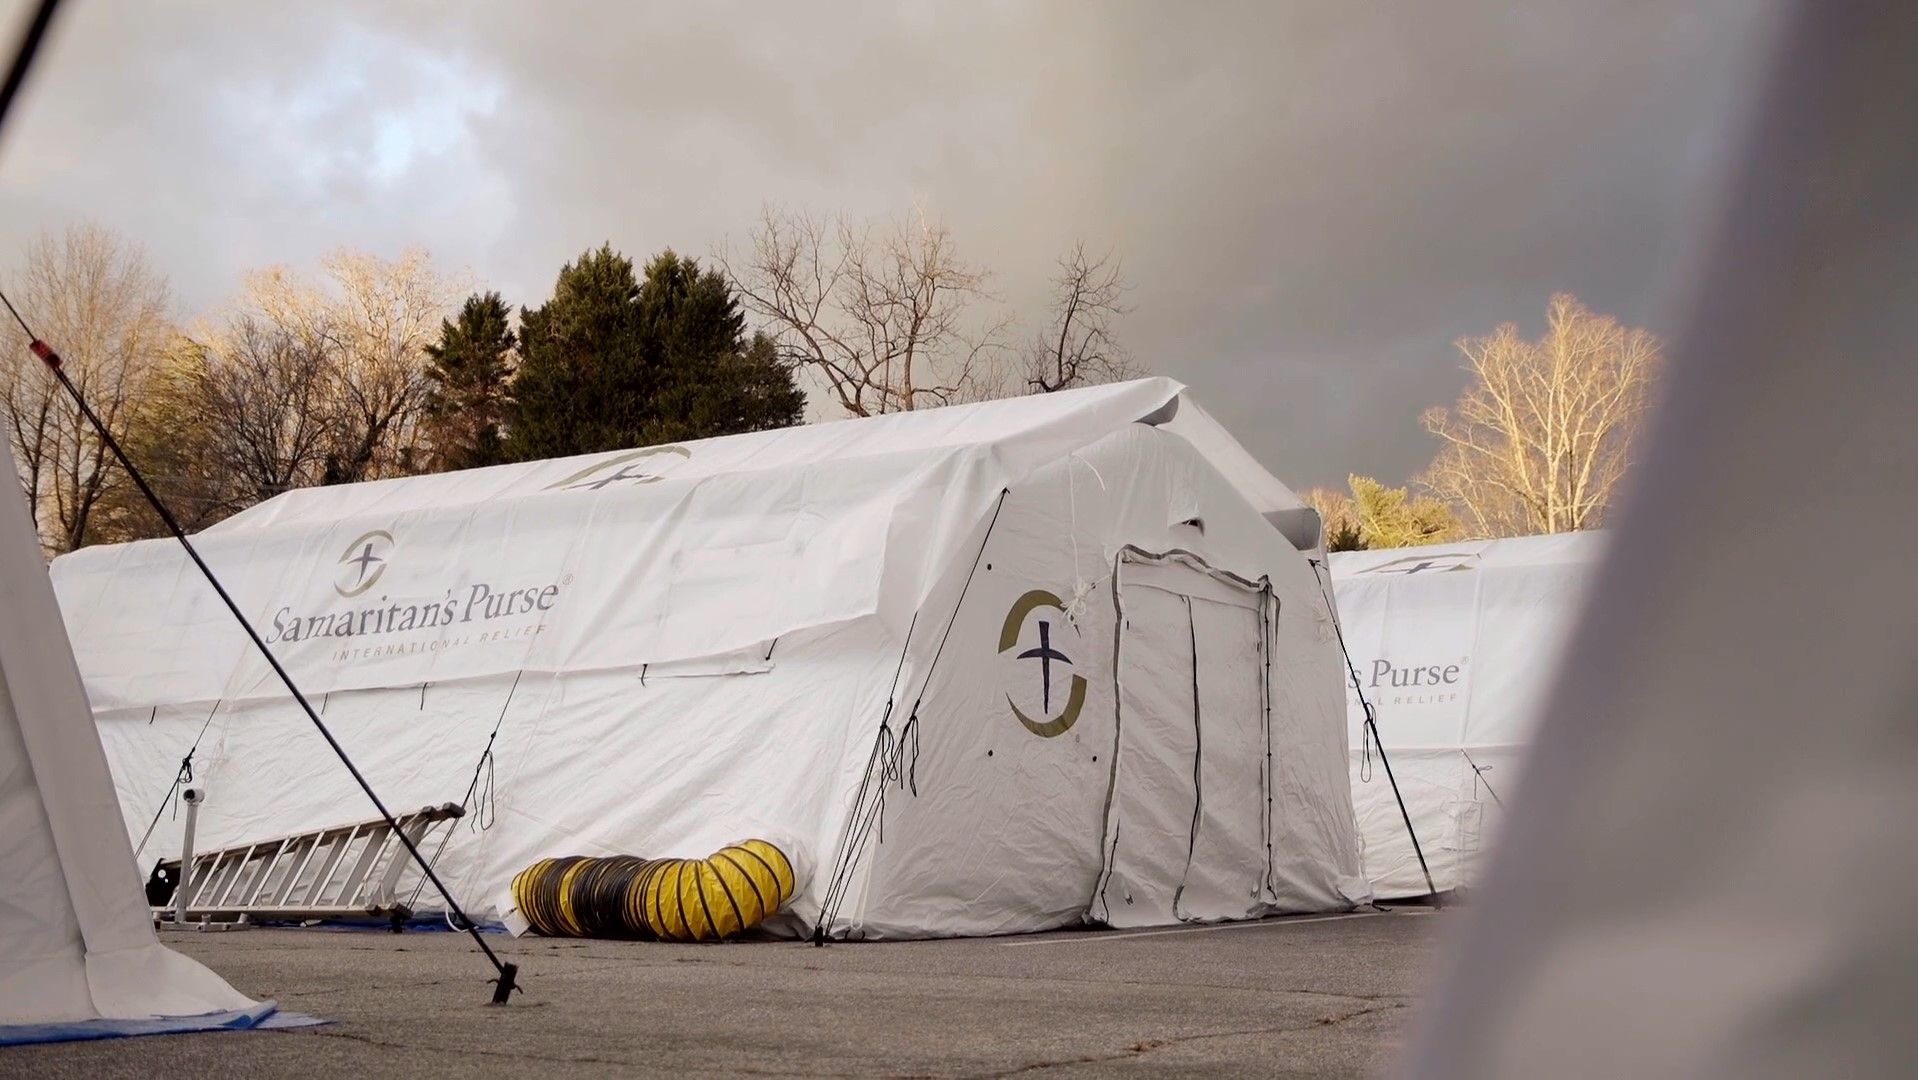 Samaritan's Purse to receive first patients at their Emergency Field Hospital in Lenoir, North Carolina, in response to rising COVID 19 cases